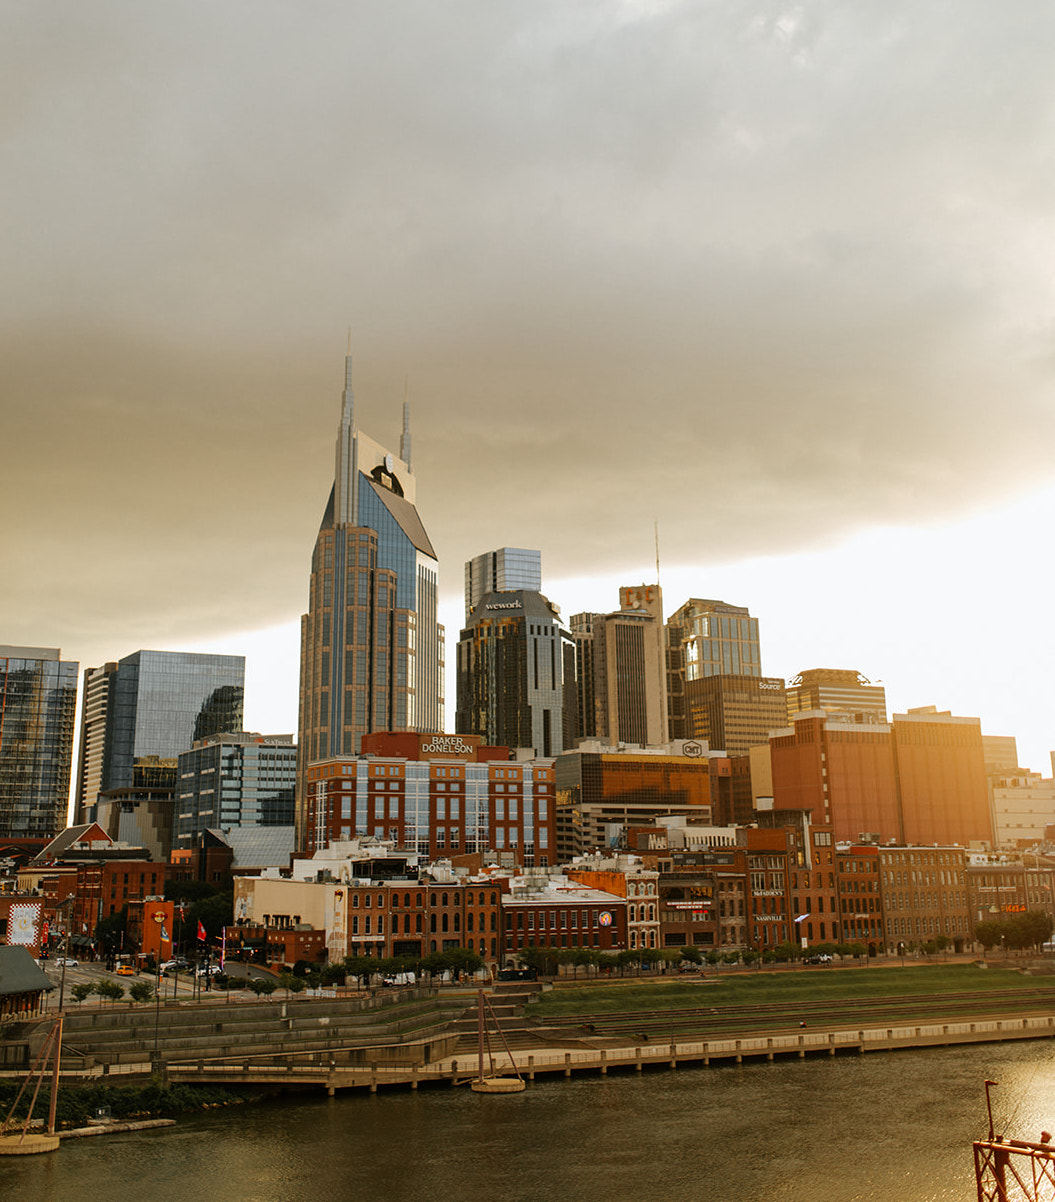 A hazy view of the Nashville city skyline from the Cumberland River, with a large cloud in the background.